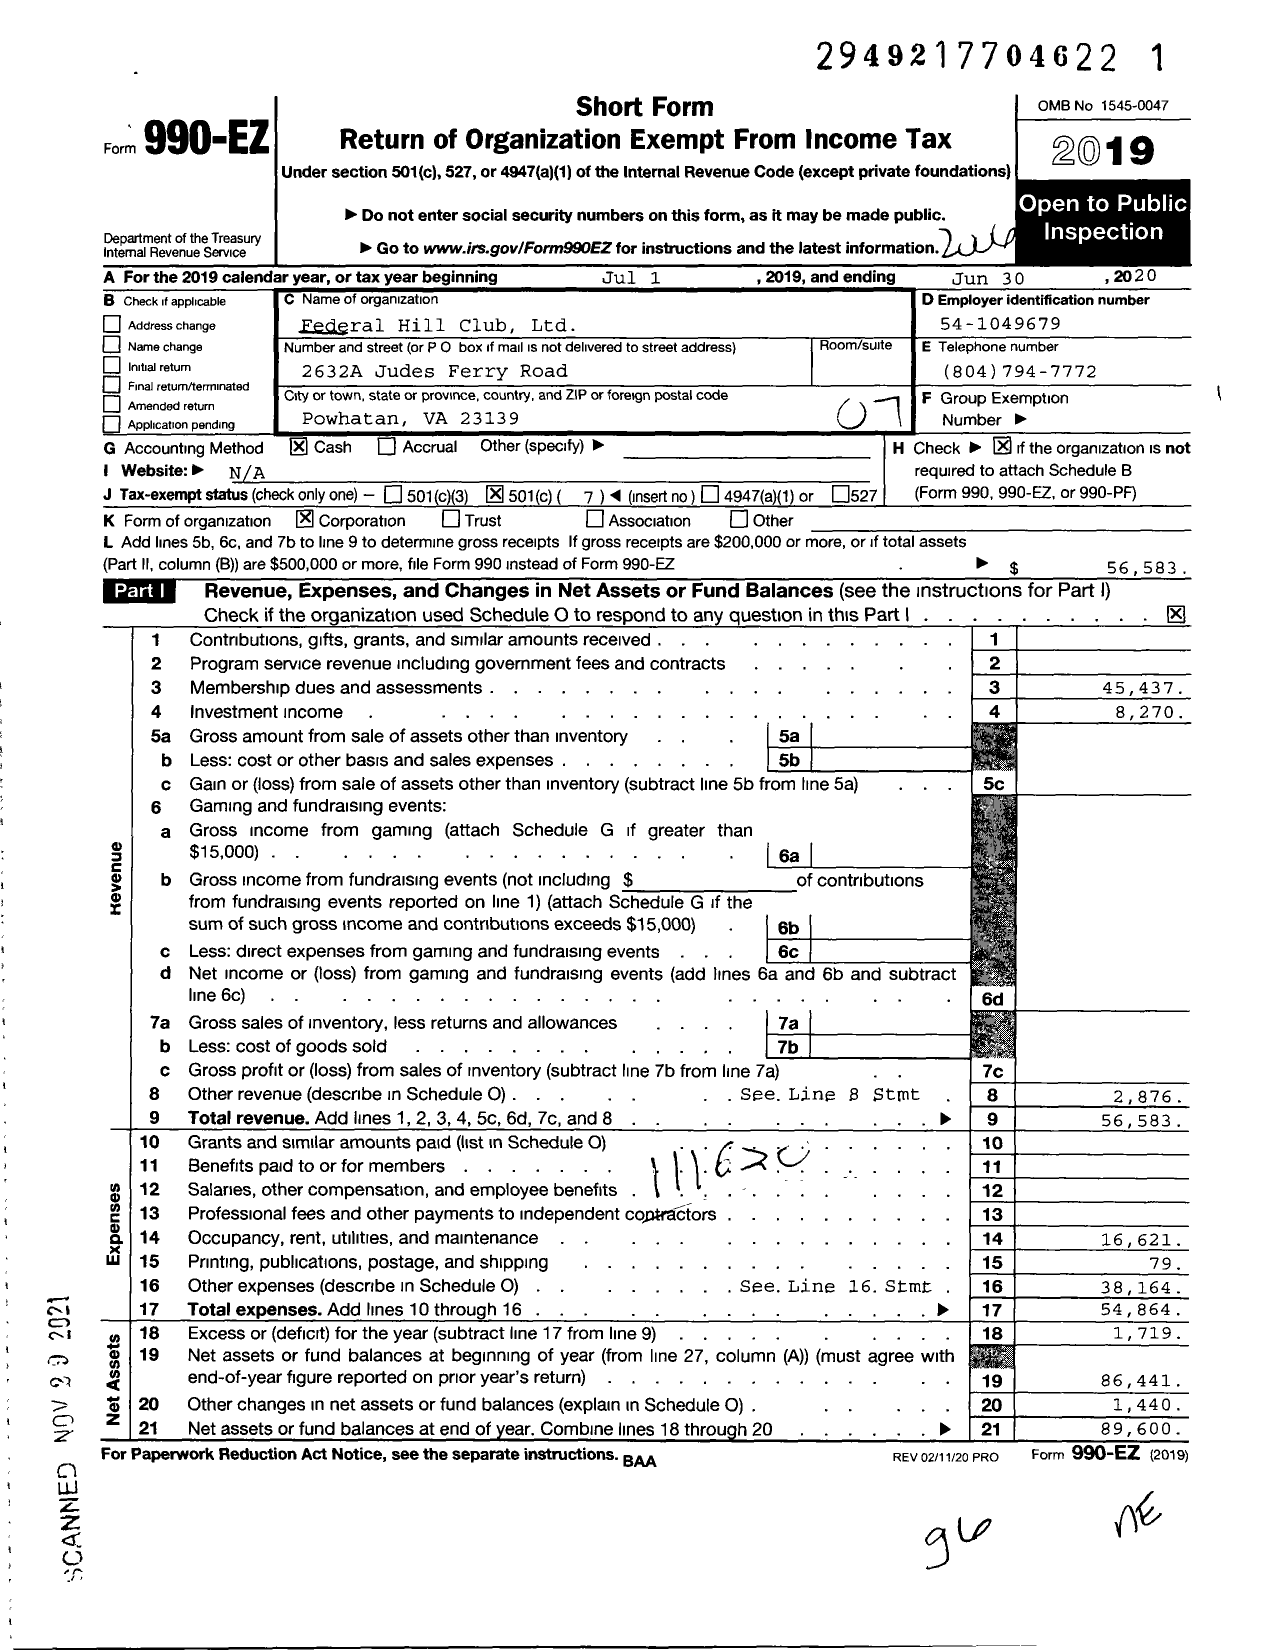 Image of first page of 2019 Form 990EO for Federal Hill Club